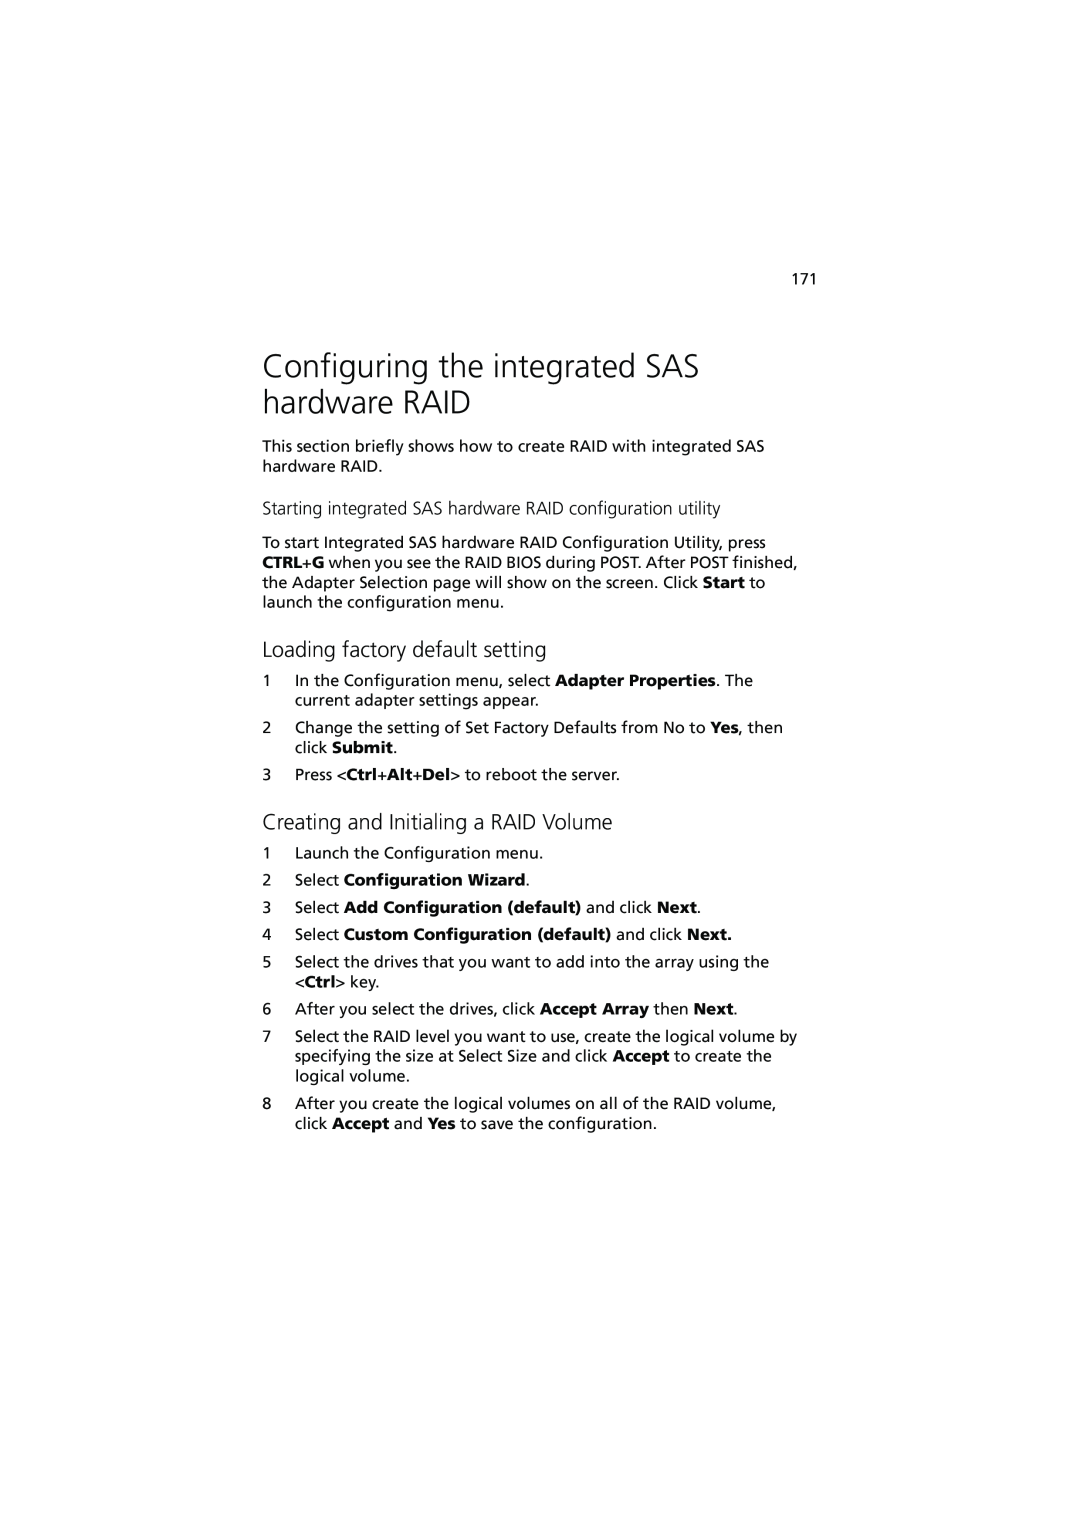 Acer R720 Series manual Configuring the integrated SAS hardware RAID, Loading factory default setting 